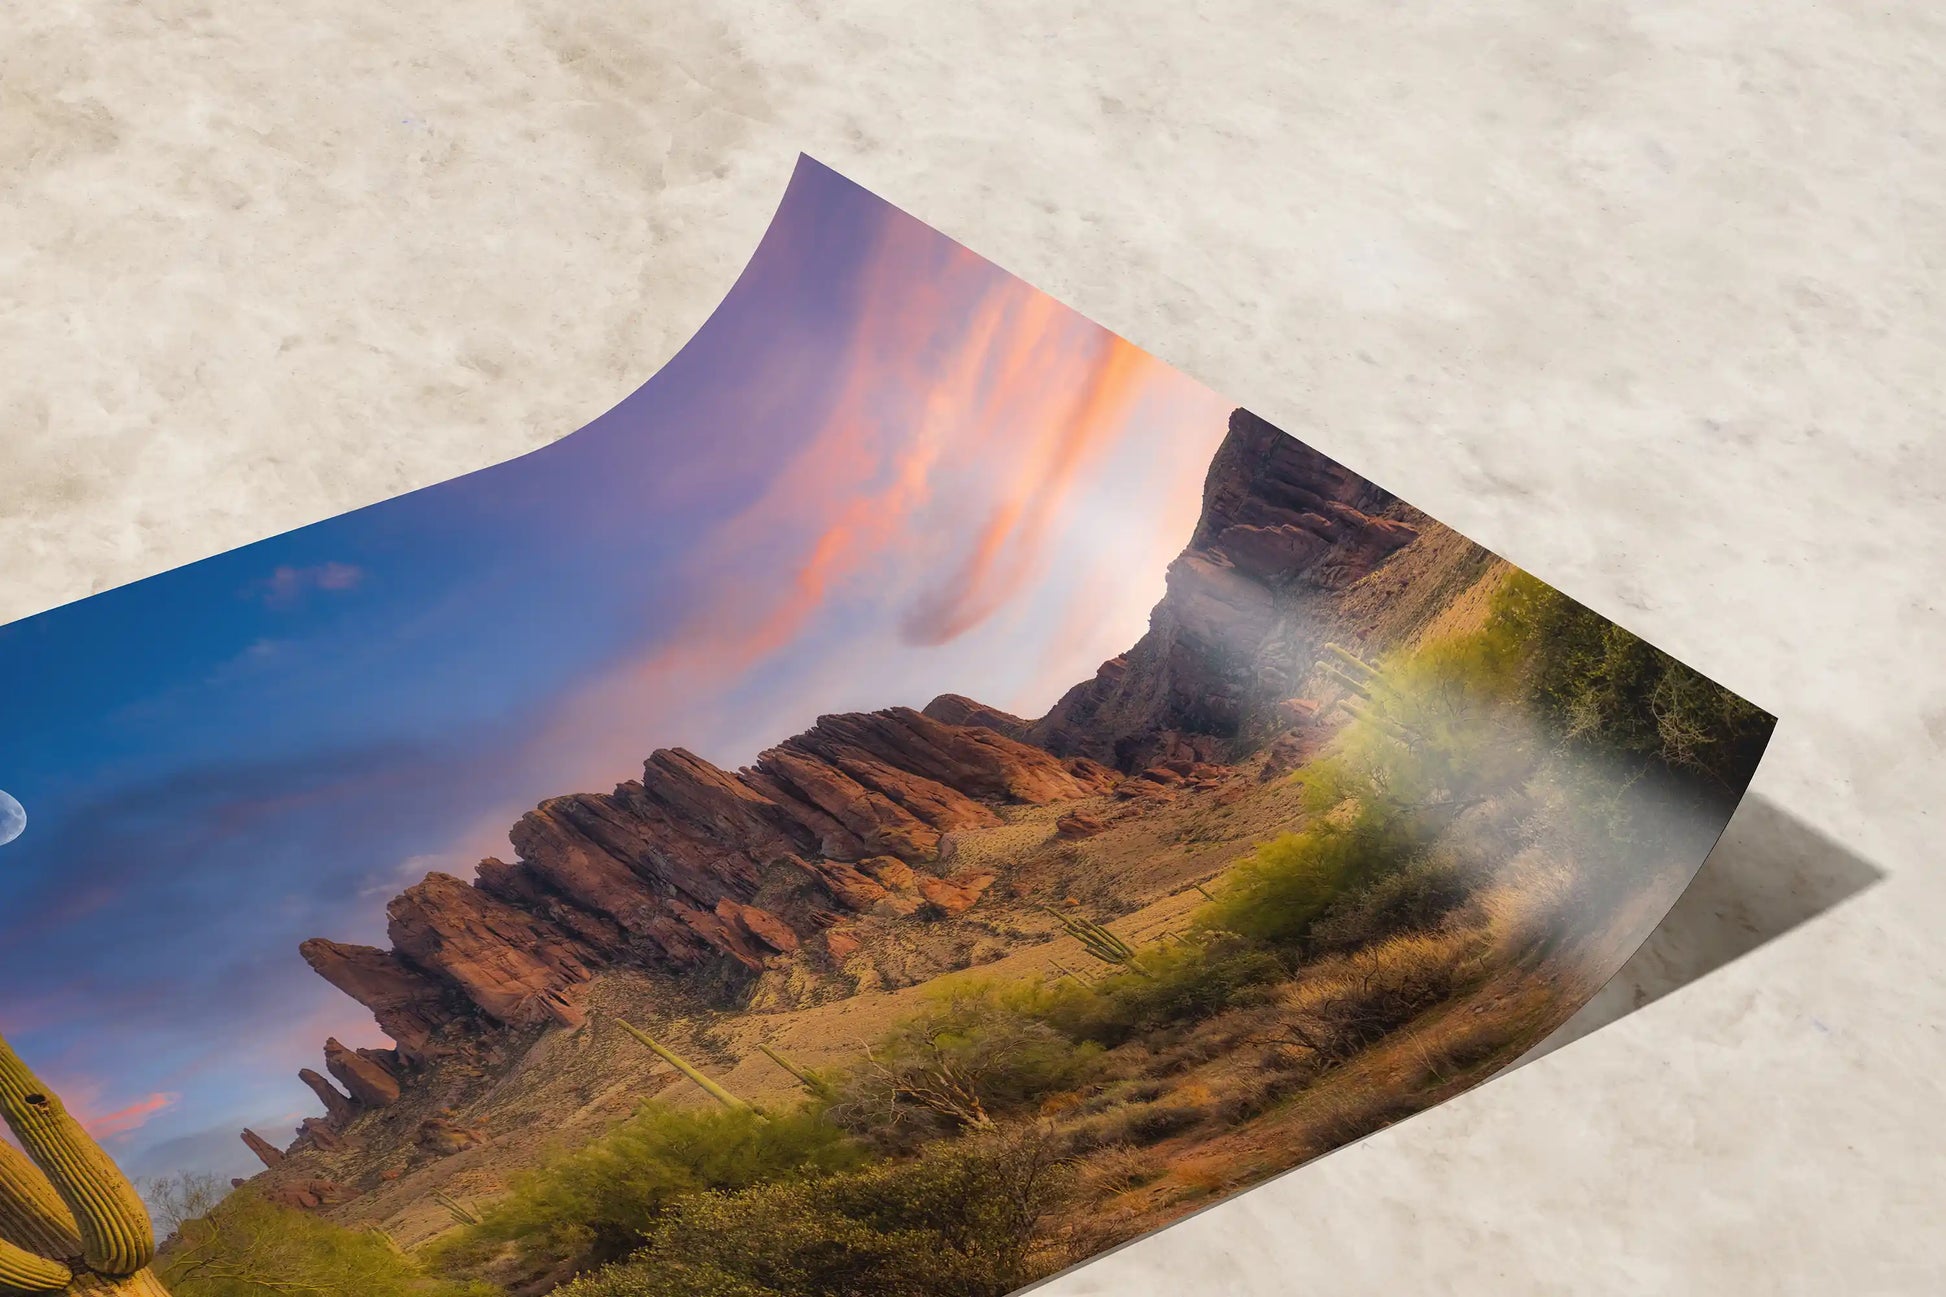 A curved paper print example of the Superstition Mountains at Lost Dutchman State Park featuring a prominent Saguaro cactus against a vibrant sunset sky.